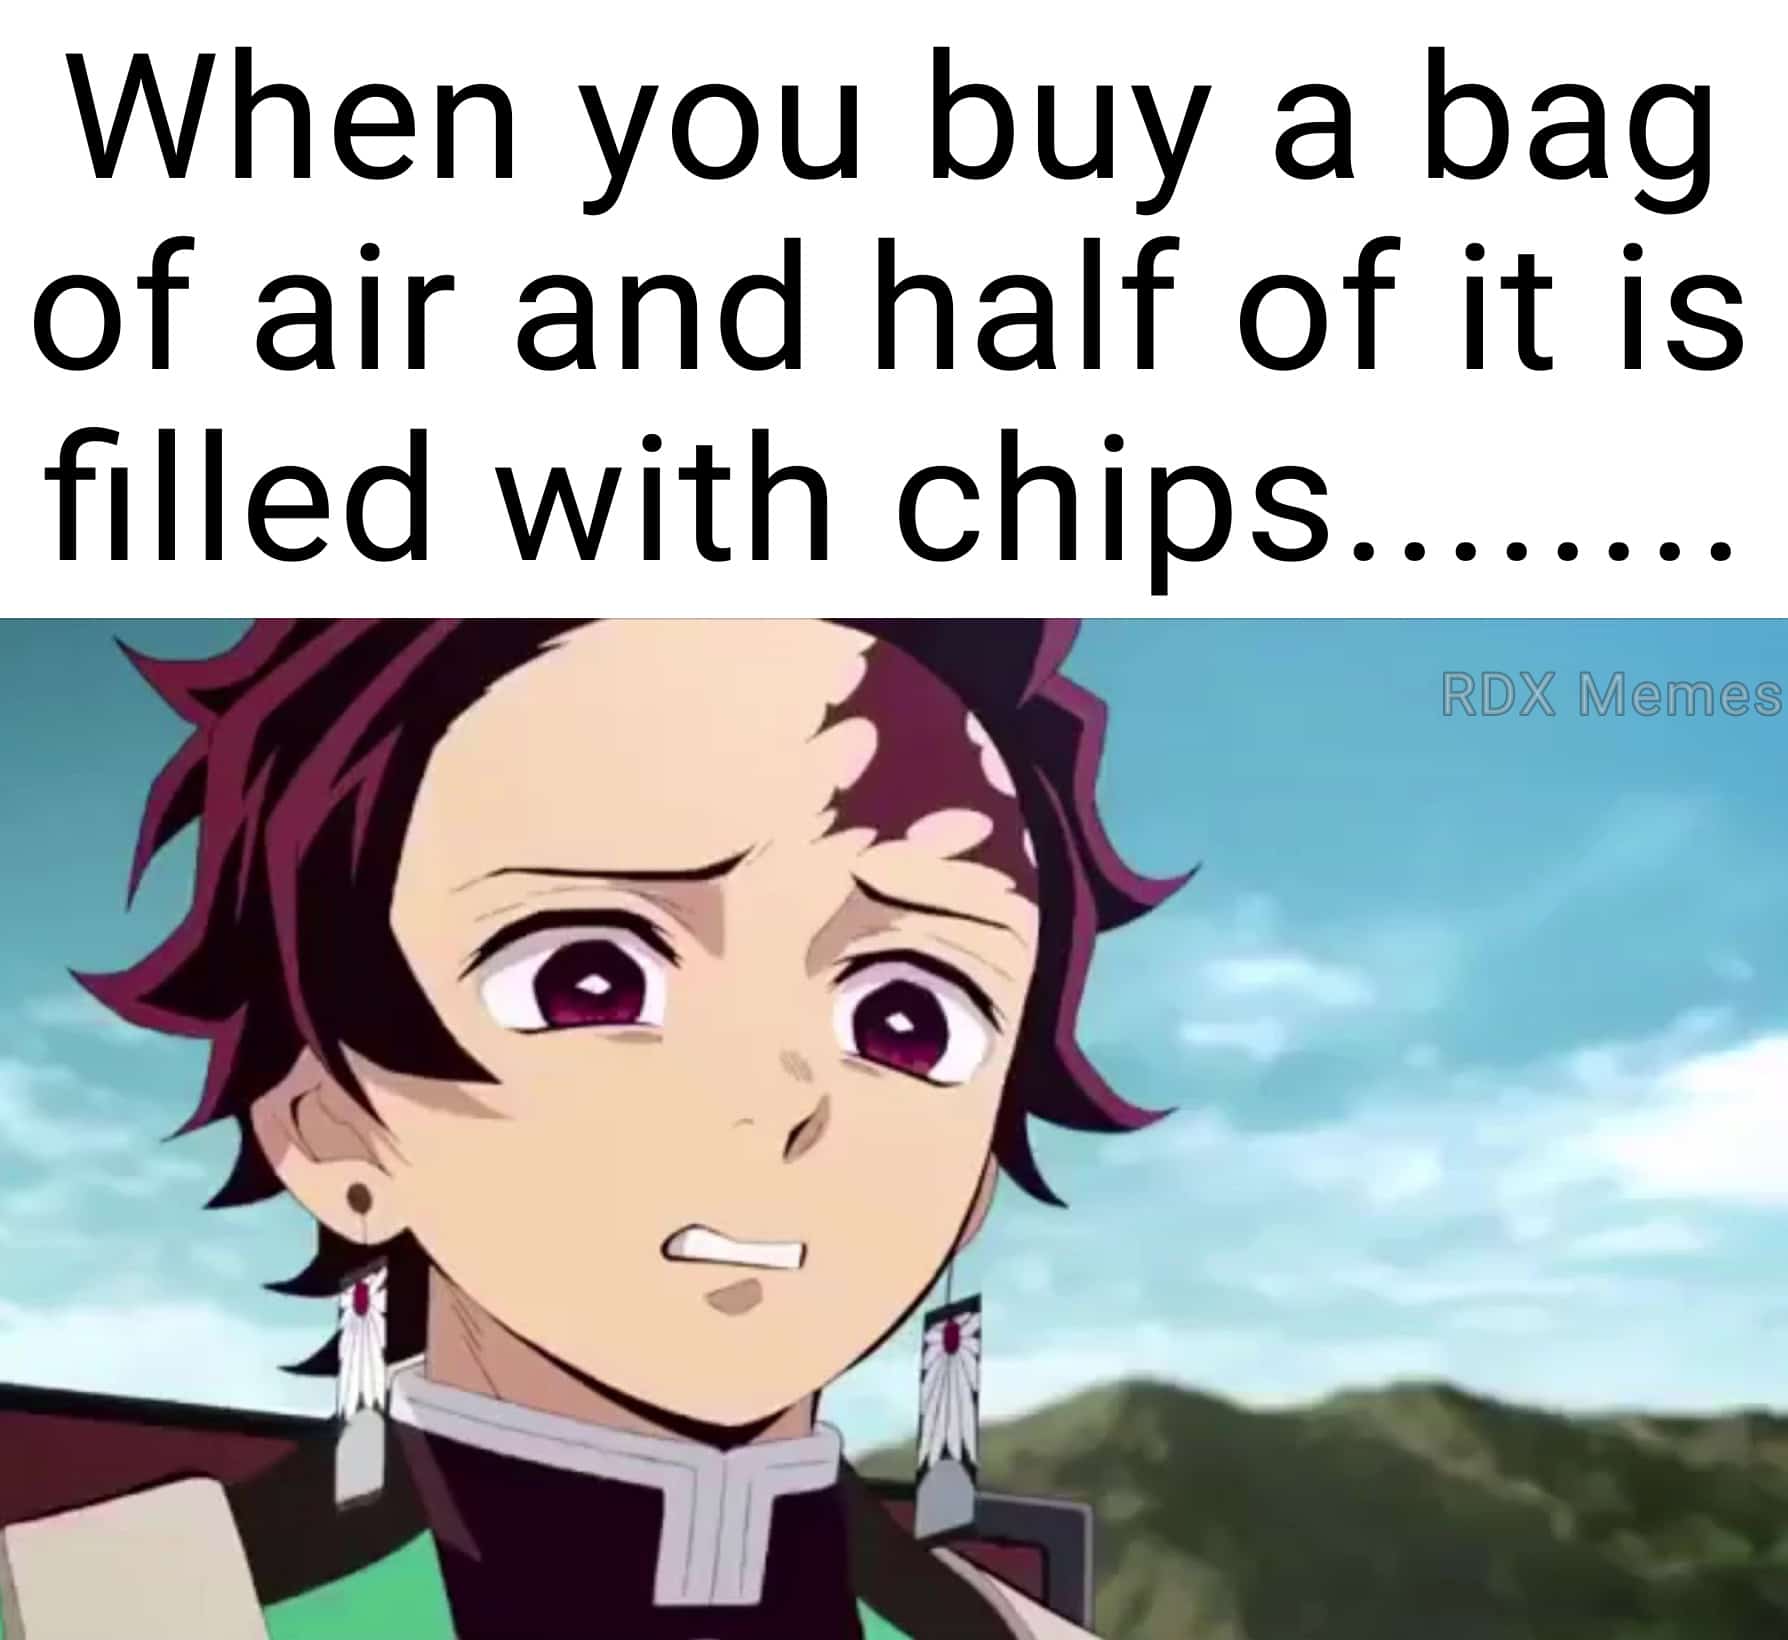 anime anime-memes anime text: When you buy a bag of air and half of it is filled with chips RDX Memes 